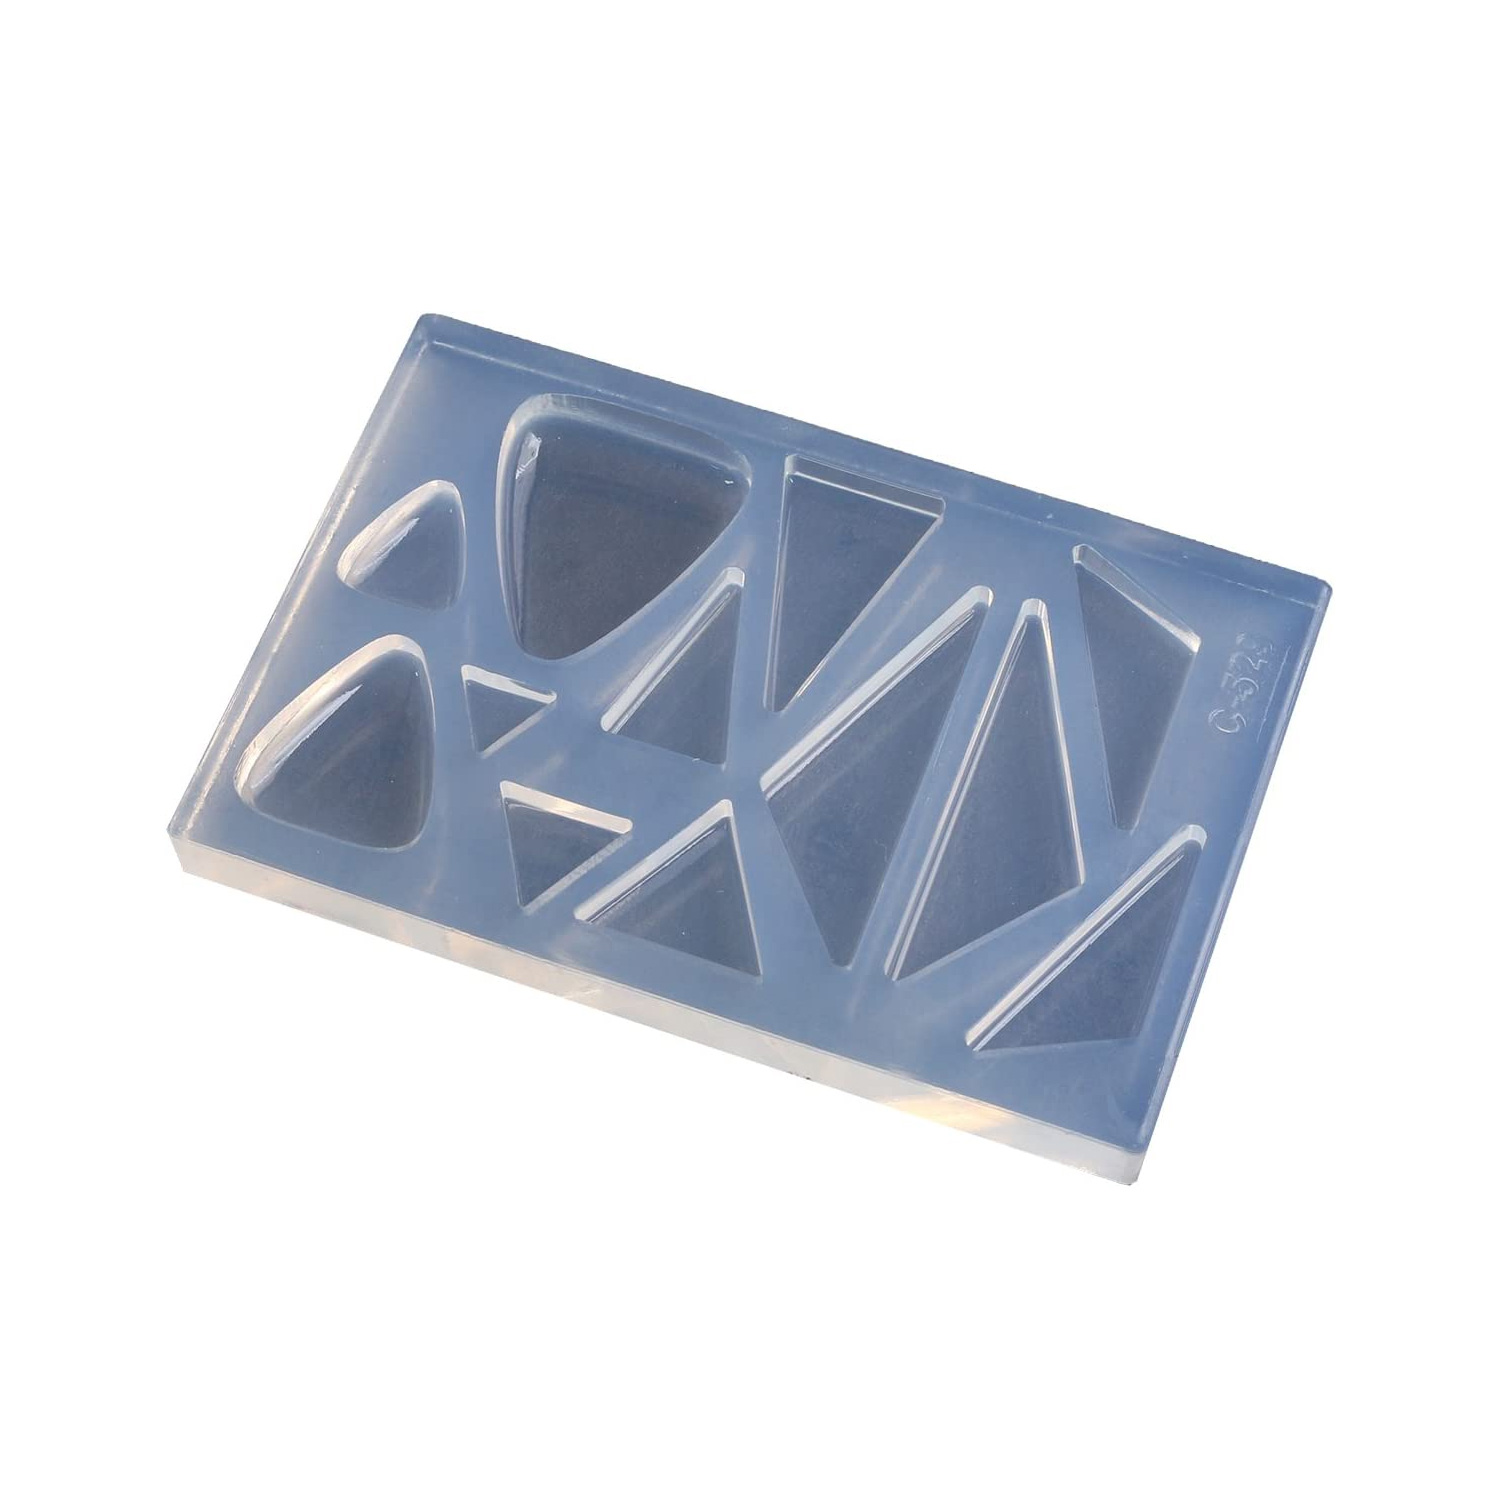 KAM-REJ-529  Resin Crafting Silicone Mold  (pcs)